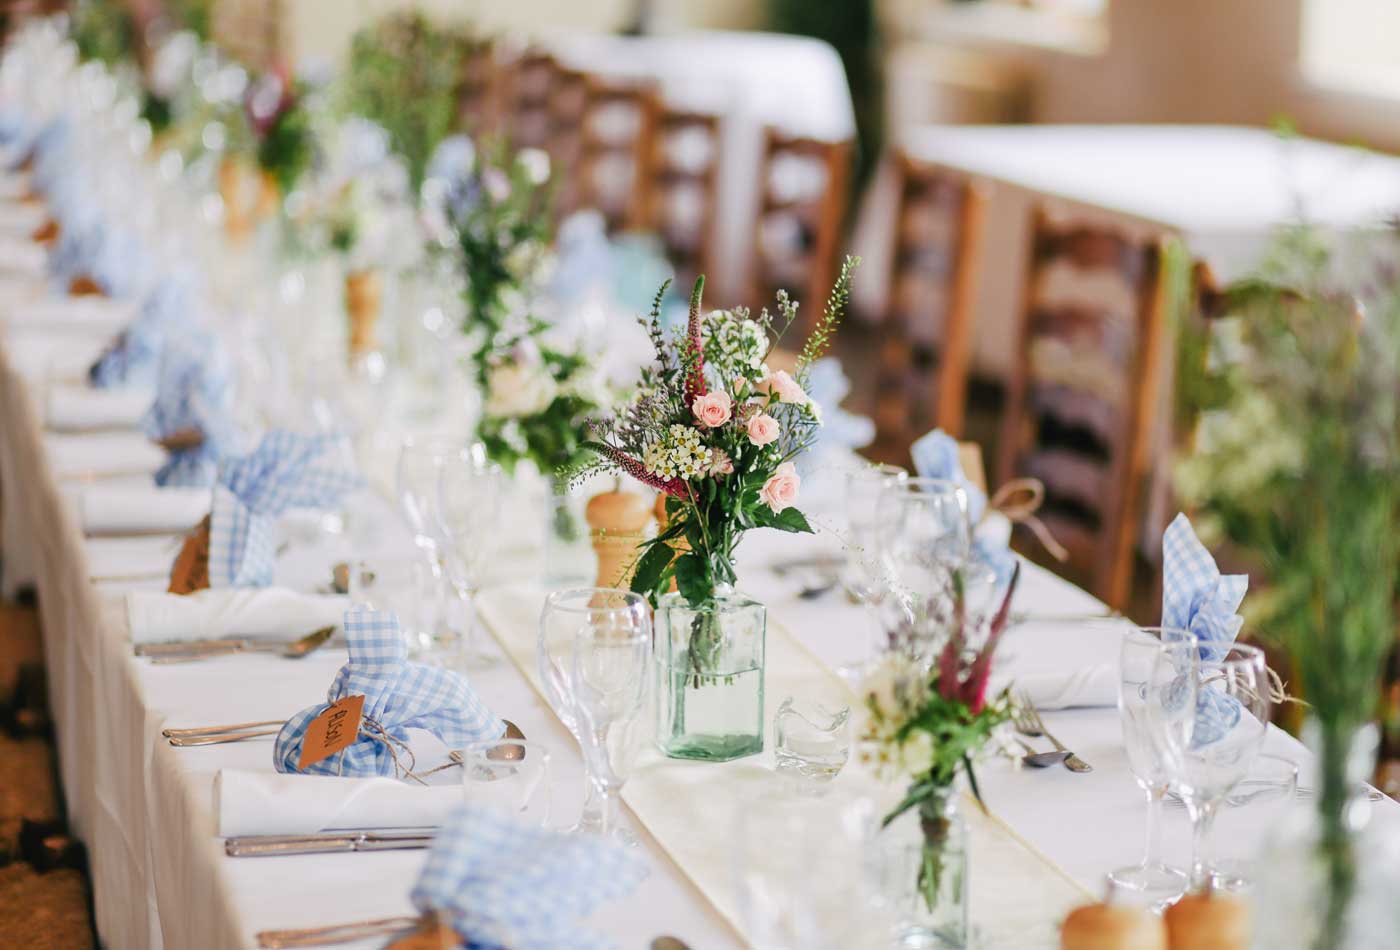 Shows a wedding dinner table - Public liability insurance for wedding